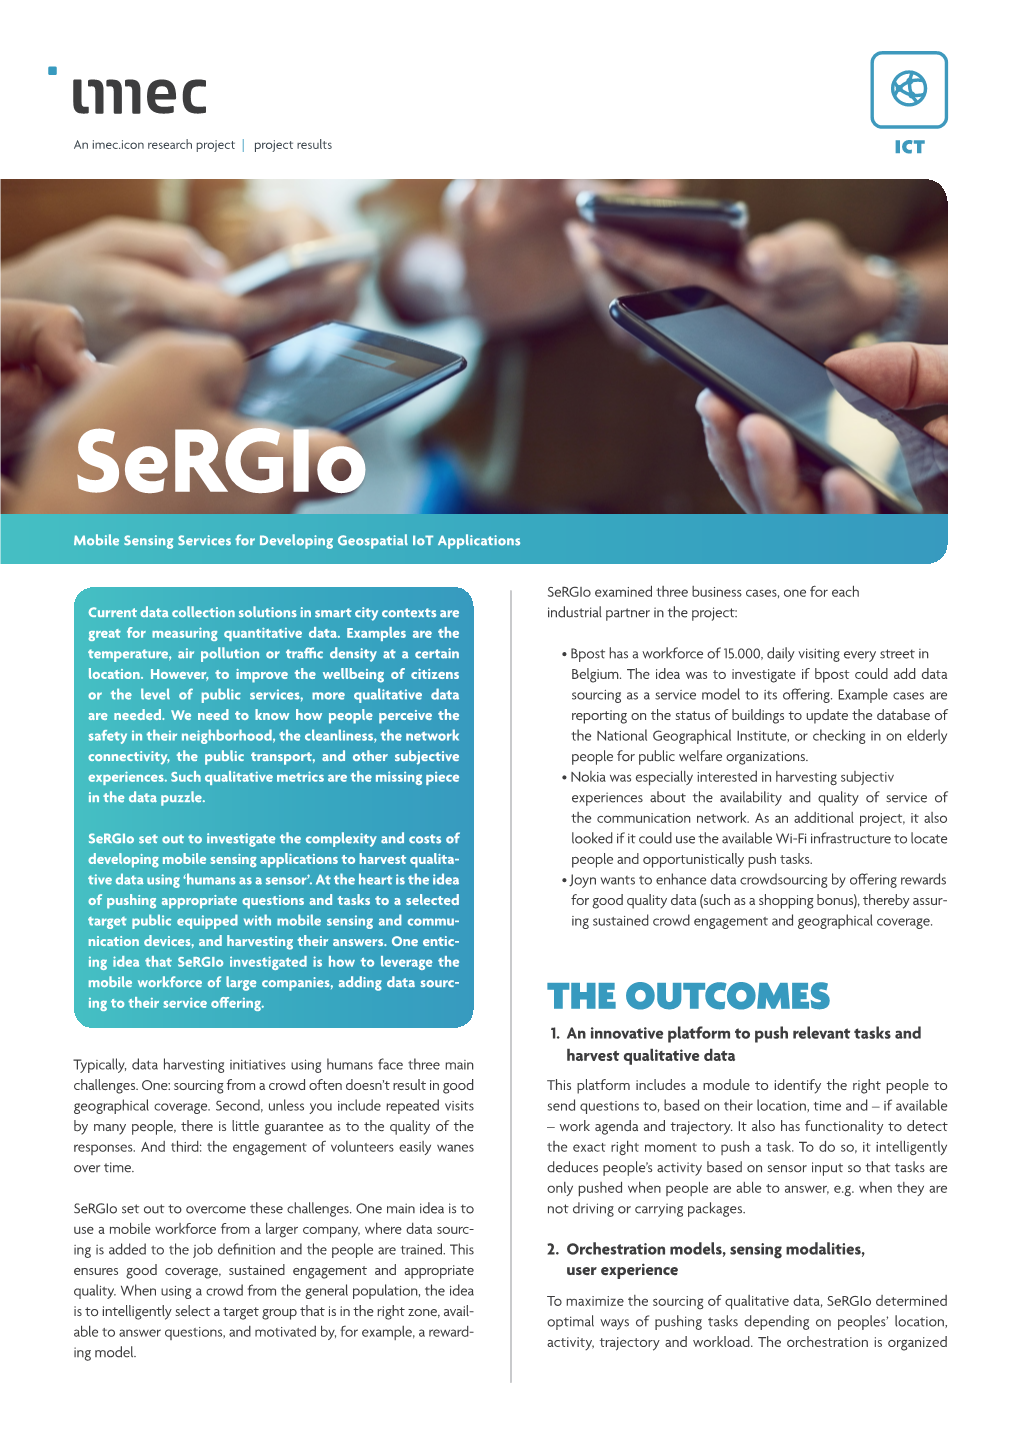 Sergio Mobile Sensing Services for Developing Geospatial Iot Applications